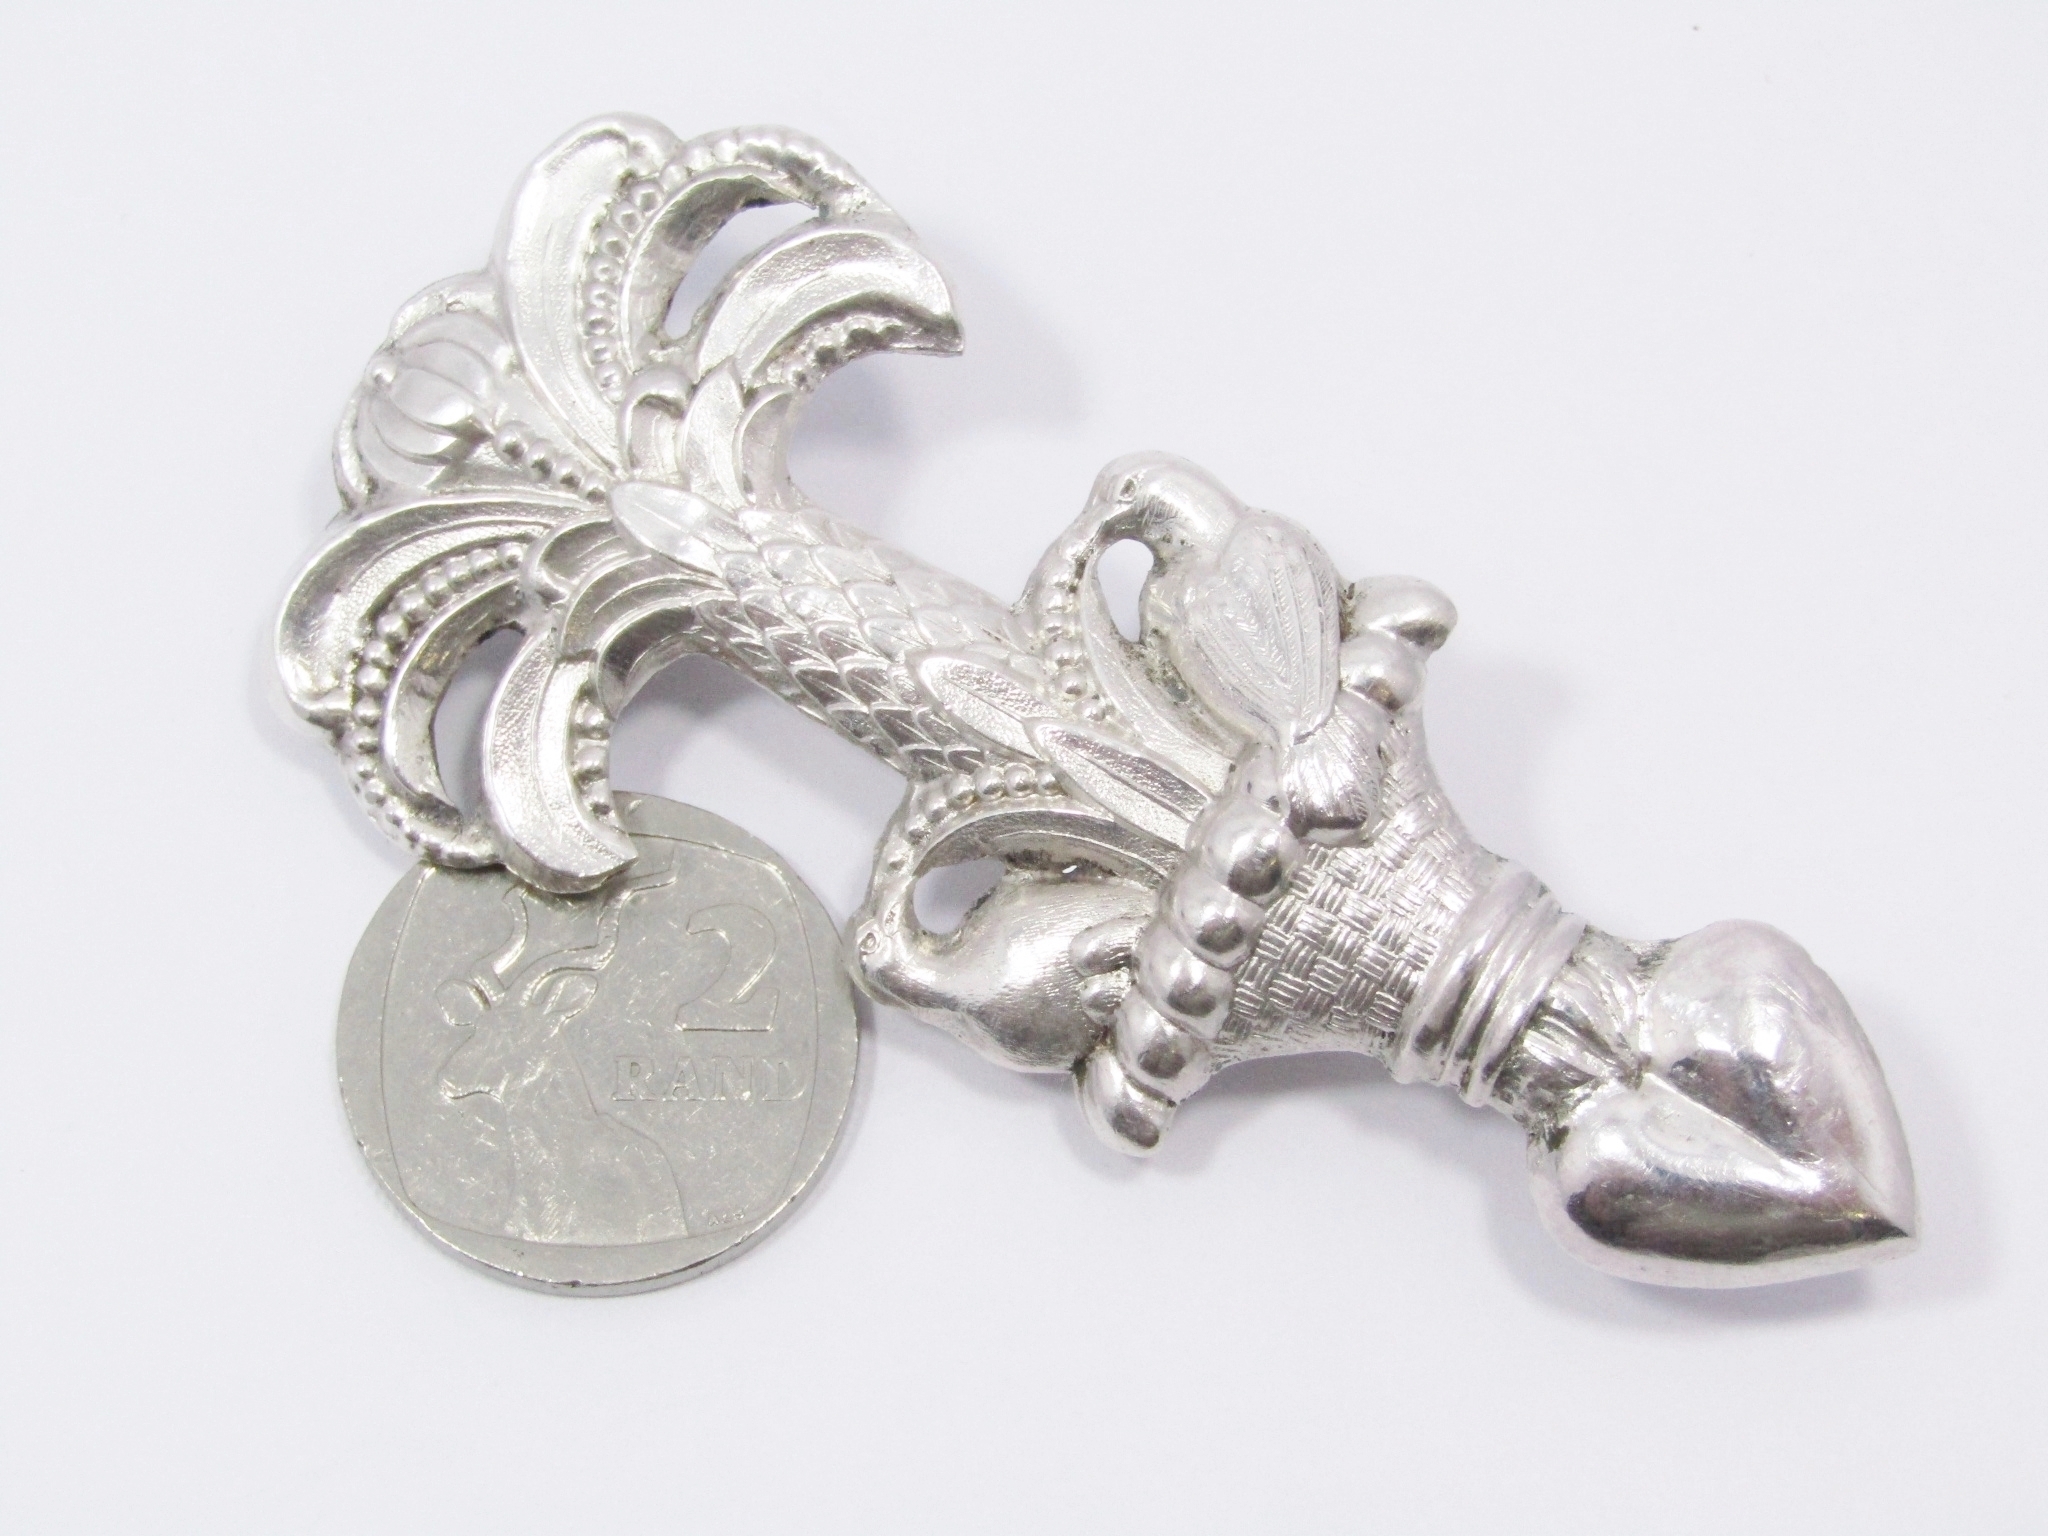 An Amazing Detailed Antique Brooch in Sterling Silver.